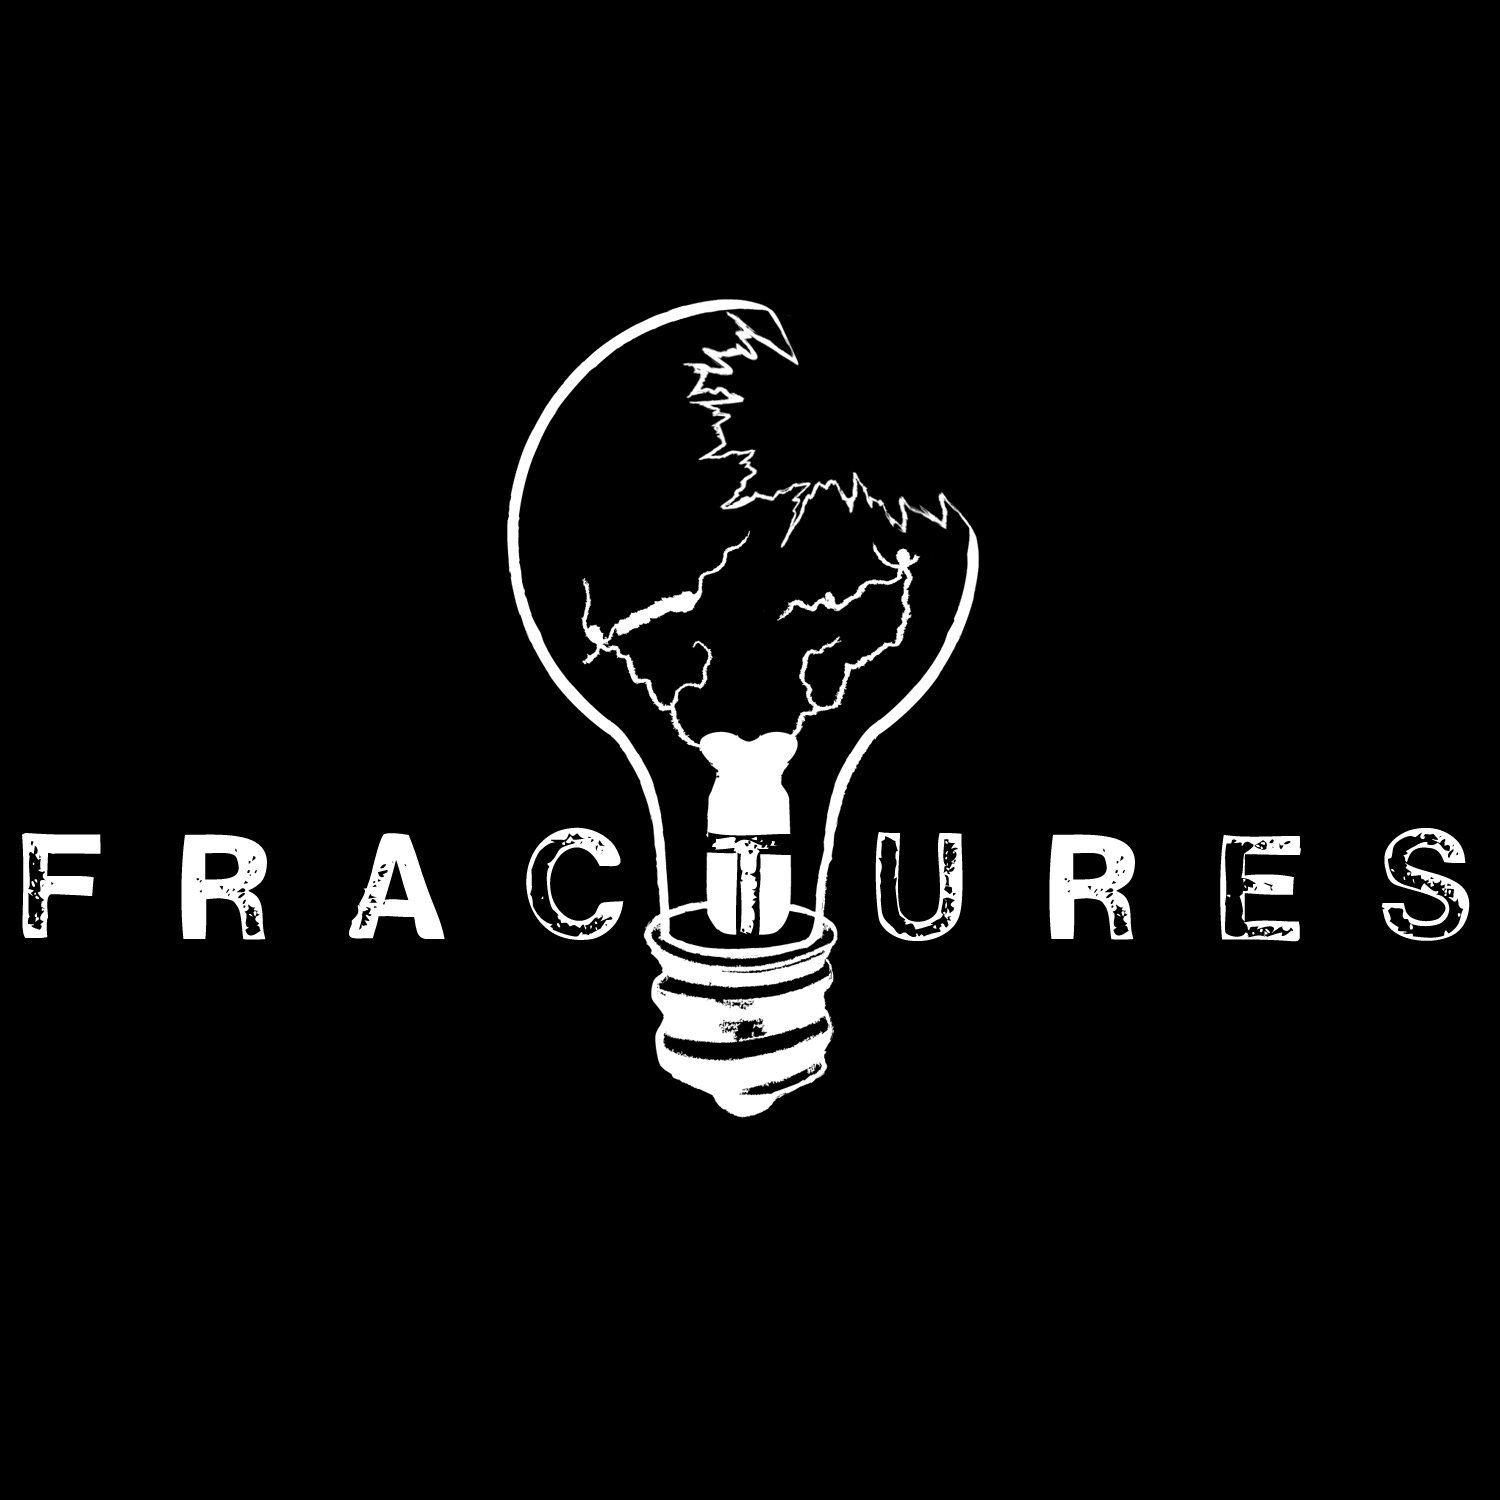 FRACTURES is an online exclusive anthology of short horror films.